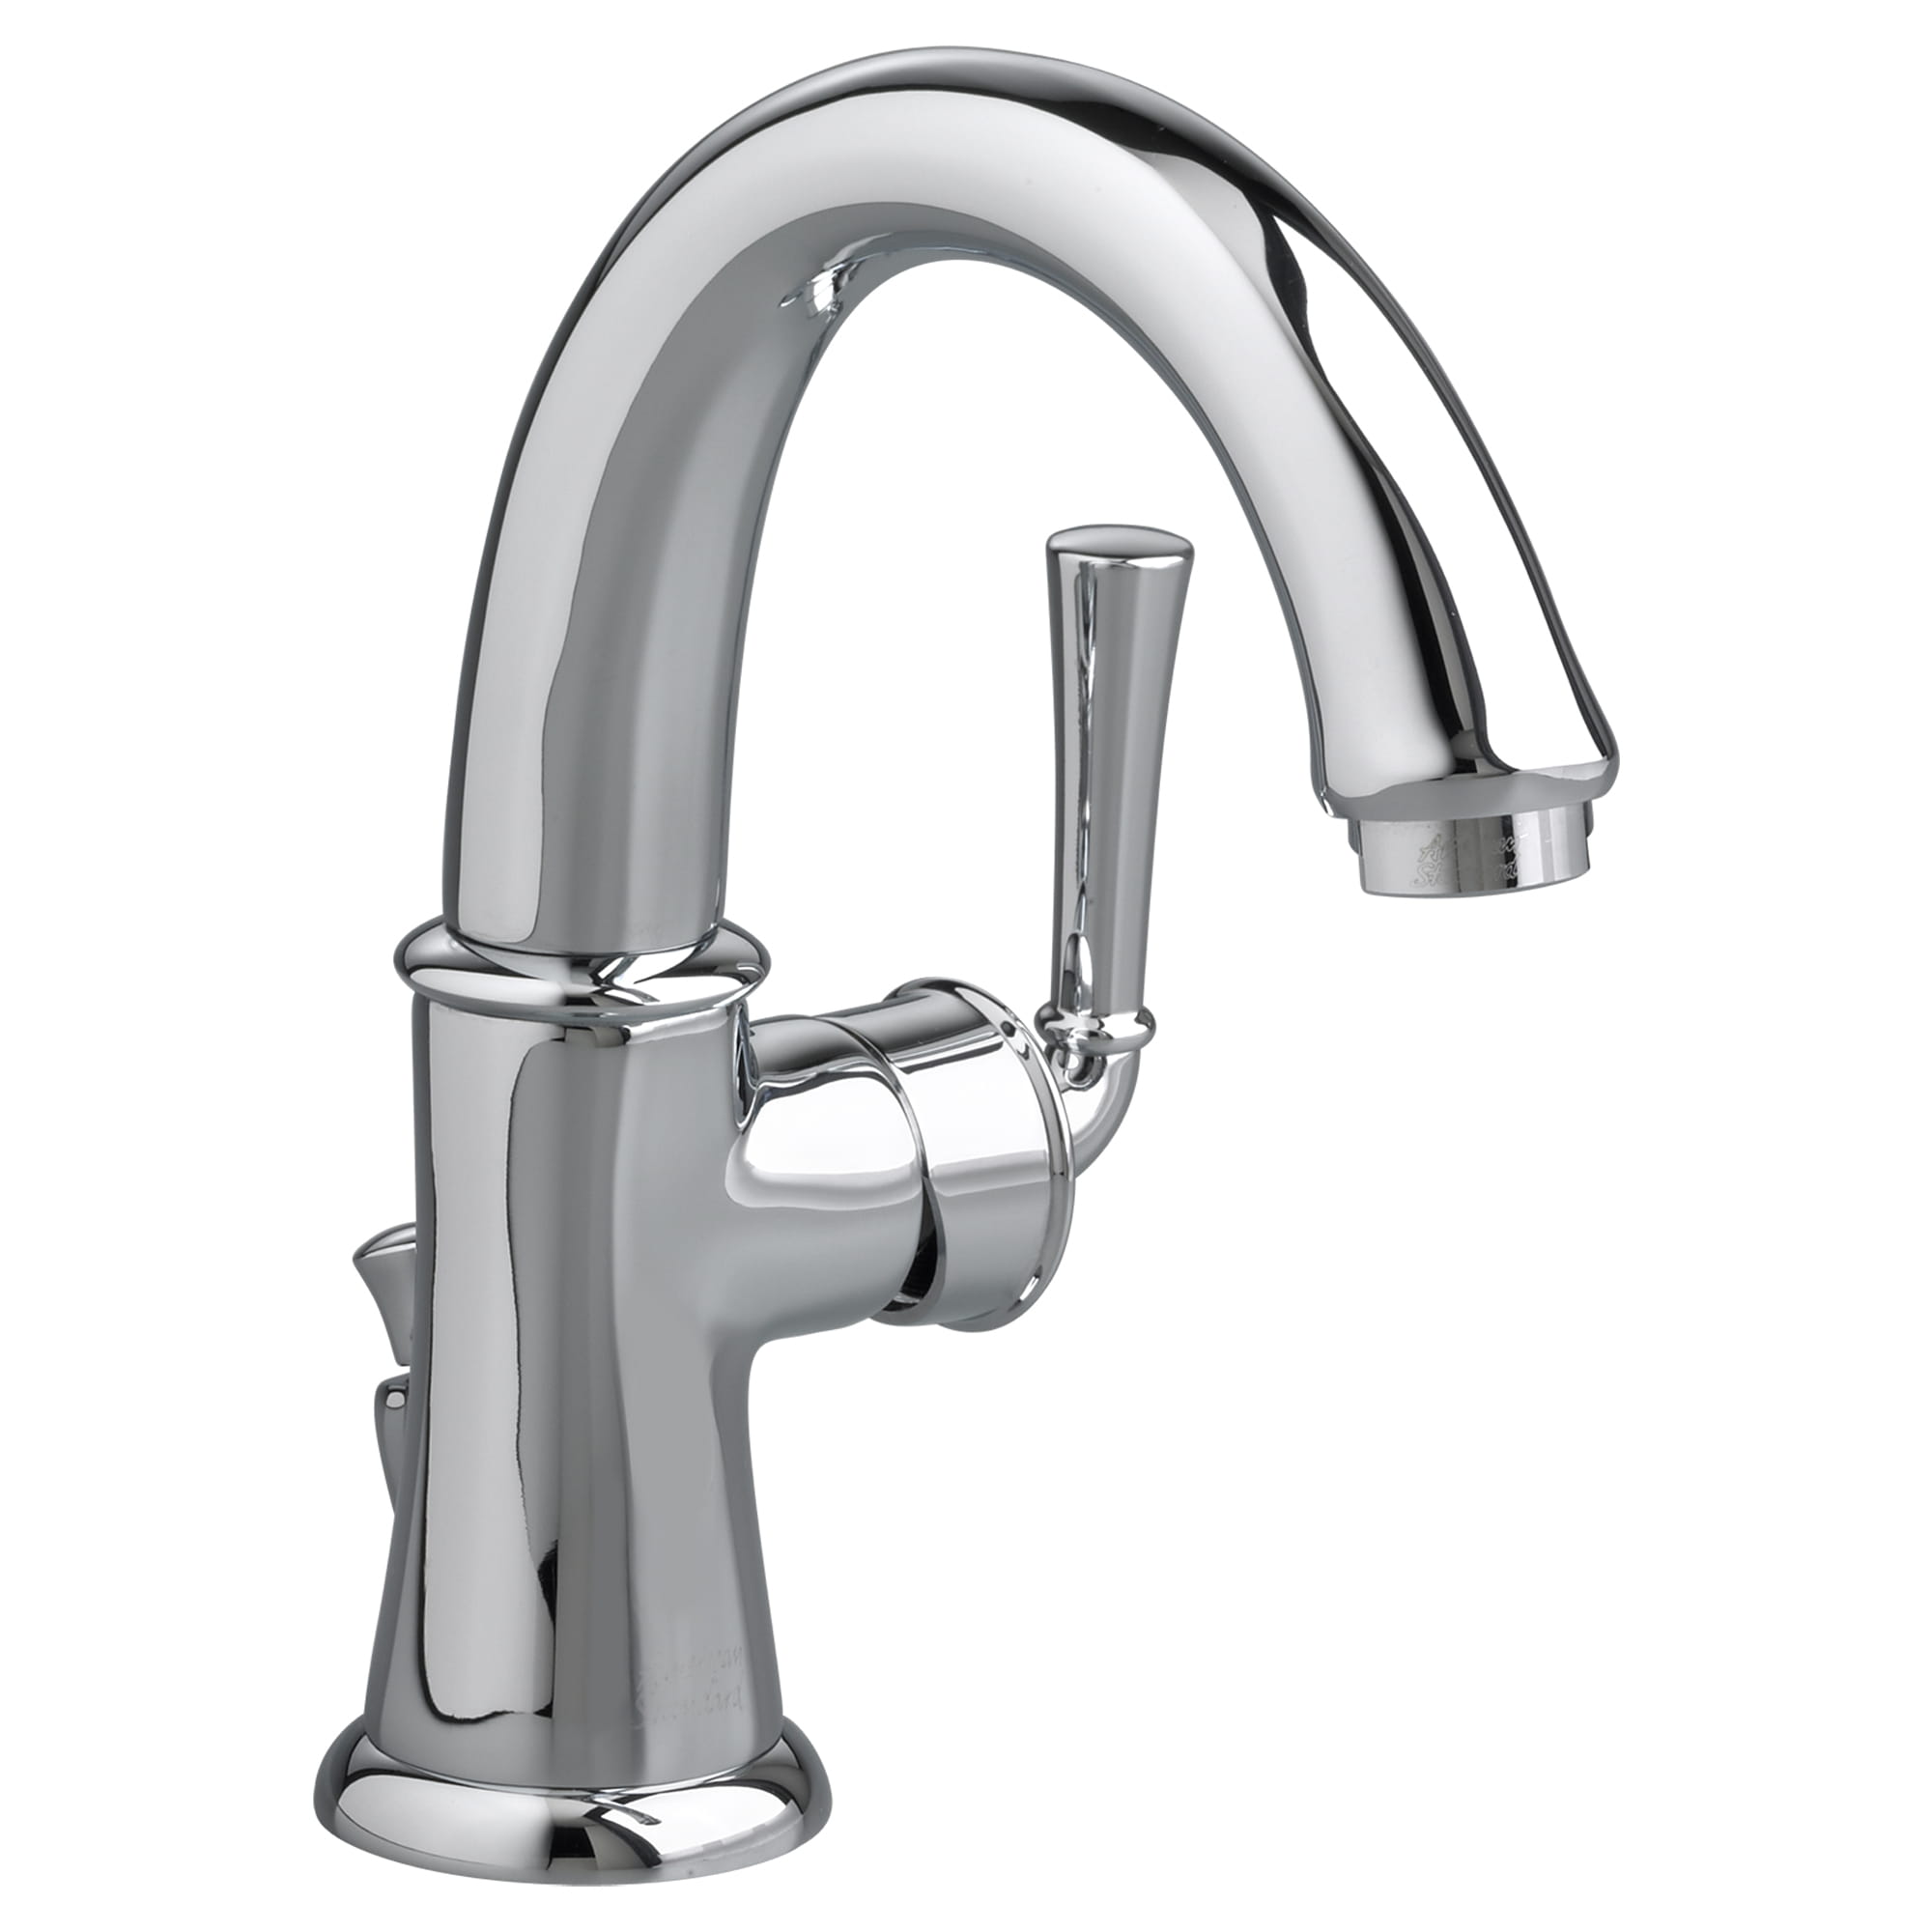 Portsmouth Single Hole Single-Handle High-Arc Bathroom Faucet 1.2 GPM with Lever Handle